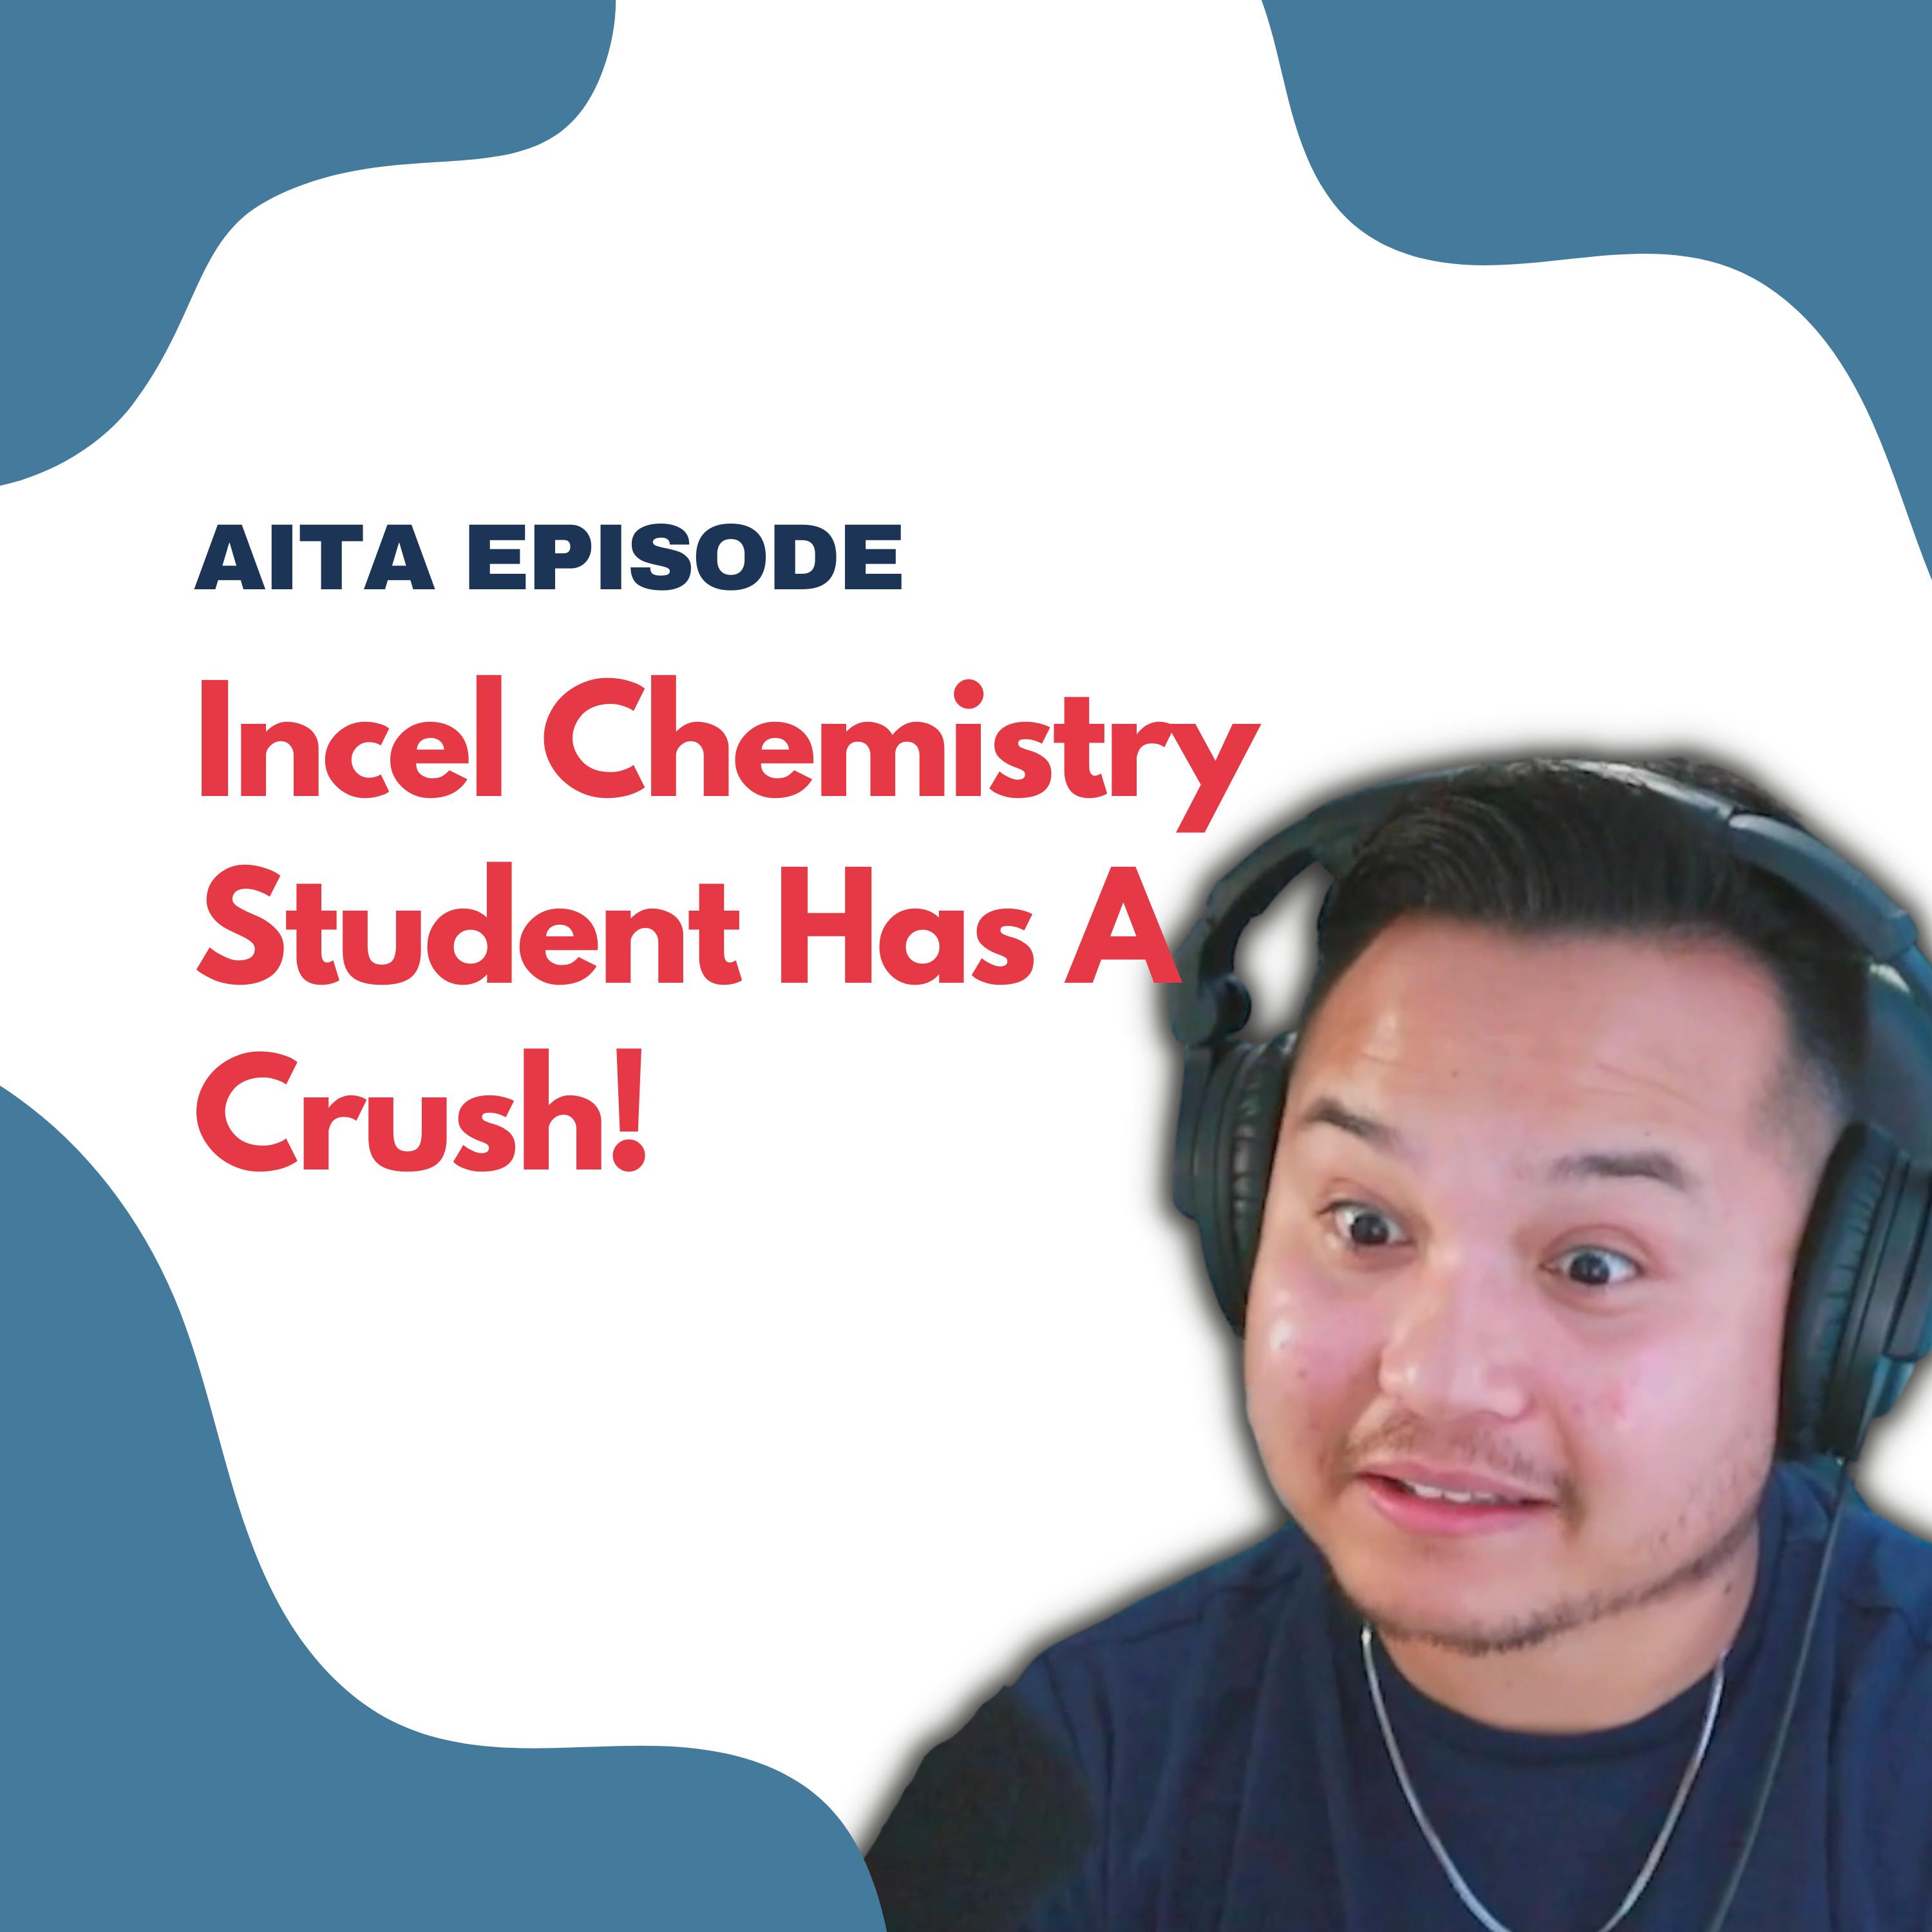 Incel Chemistry Student Has A Crush! | Am I The Asshole Image